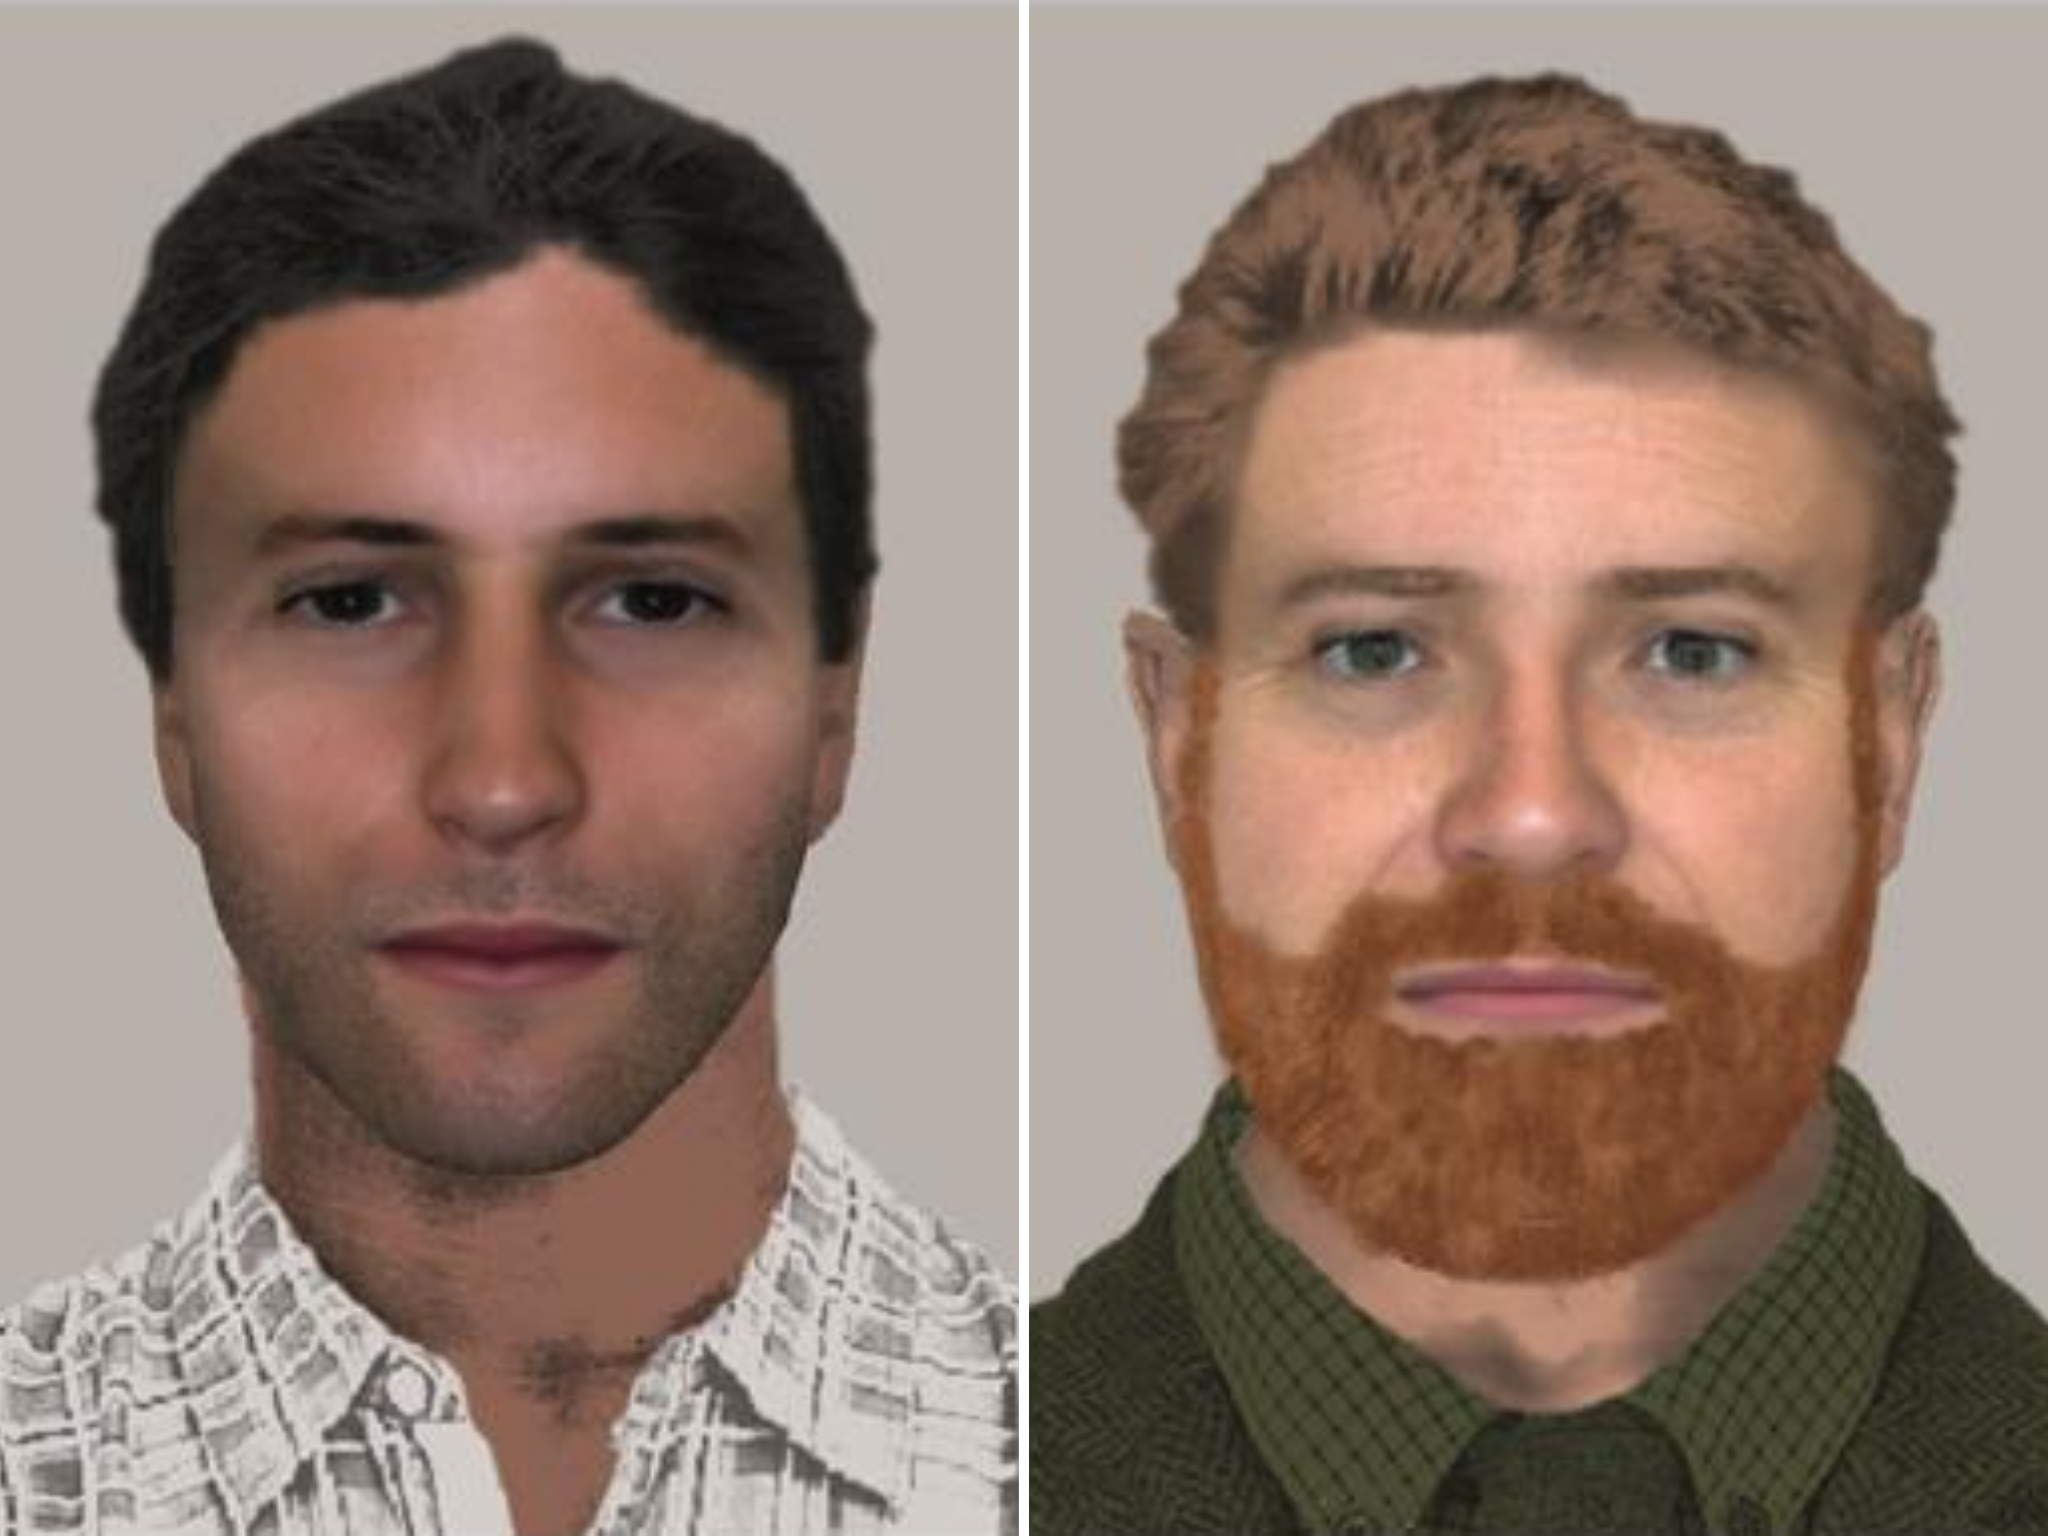 Police have released e-fit images of two men they would like to speak to about the alleged gang rape of a 17-year-old girl at Strathmore Hotel in Plymouth, Devon, in 1978.